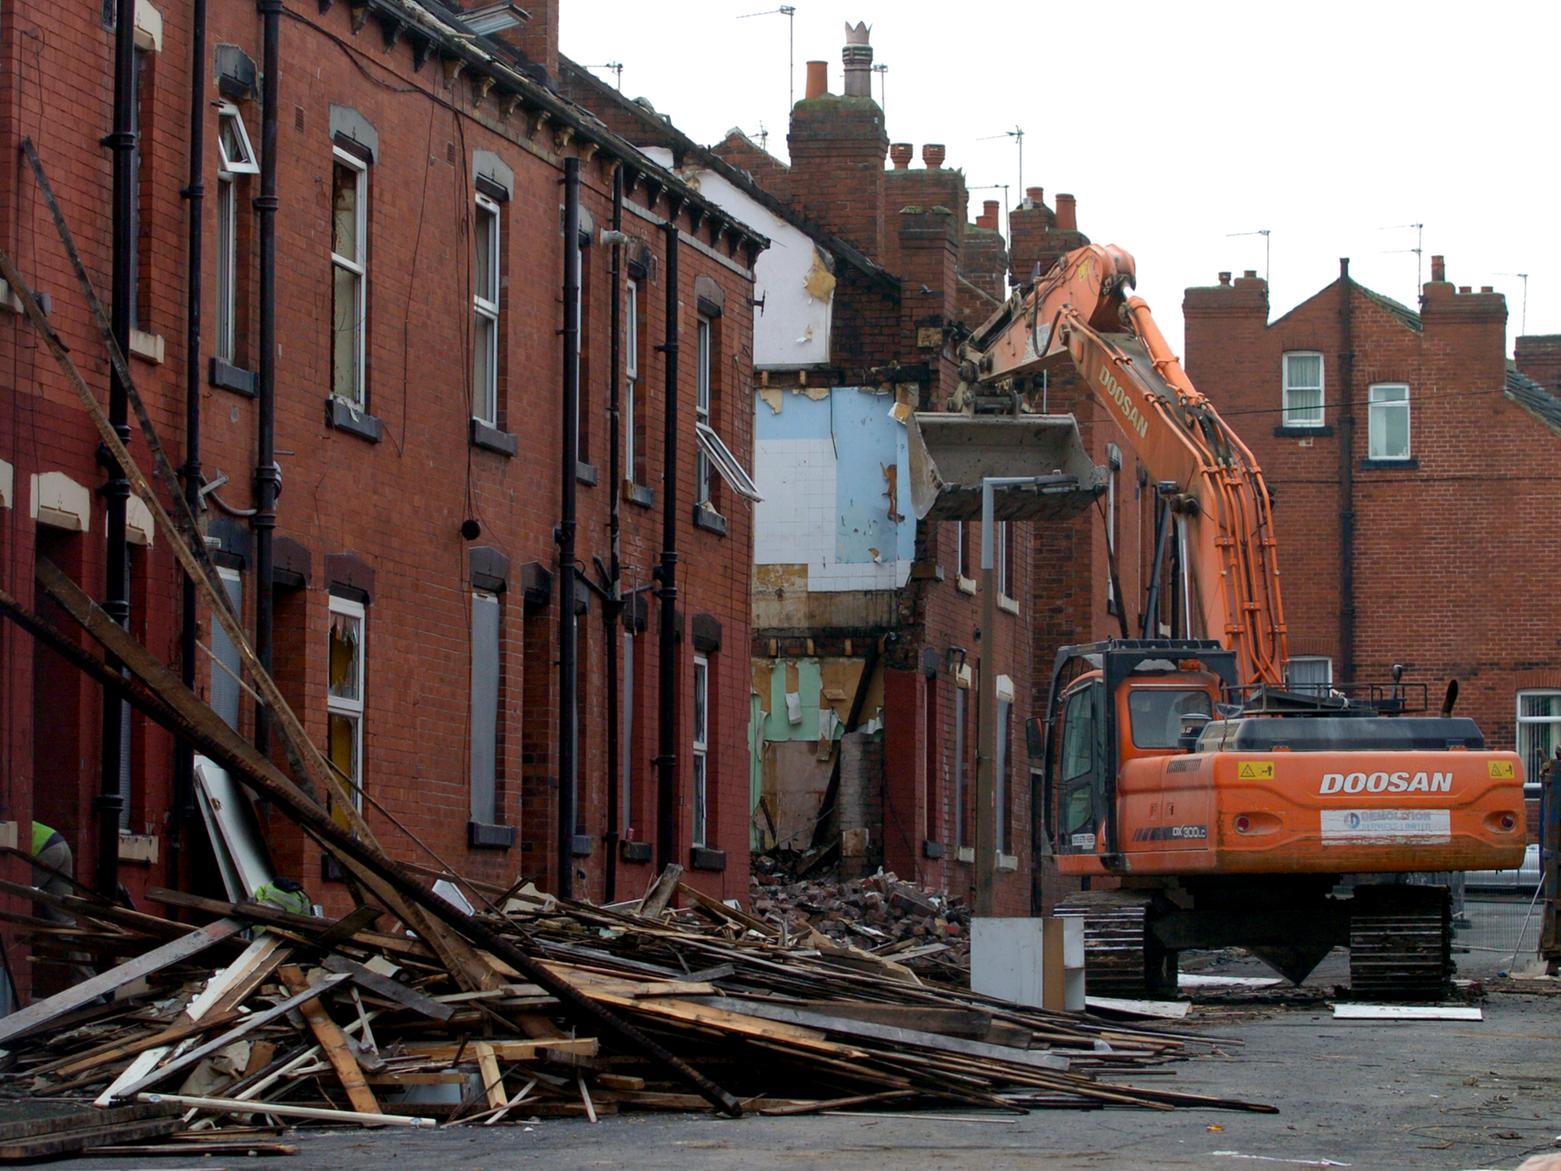 Condemned homes on Runswick Place were demolished in January 2010.